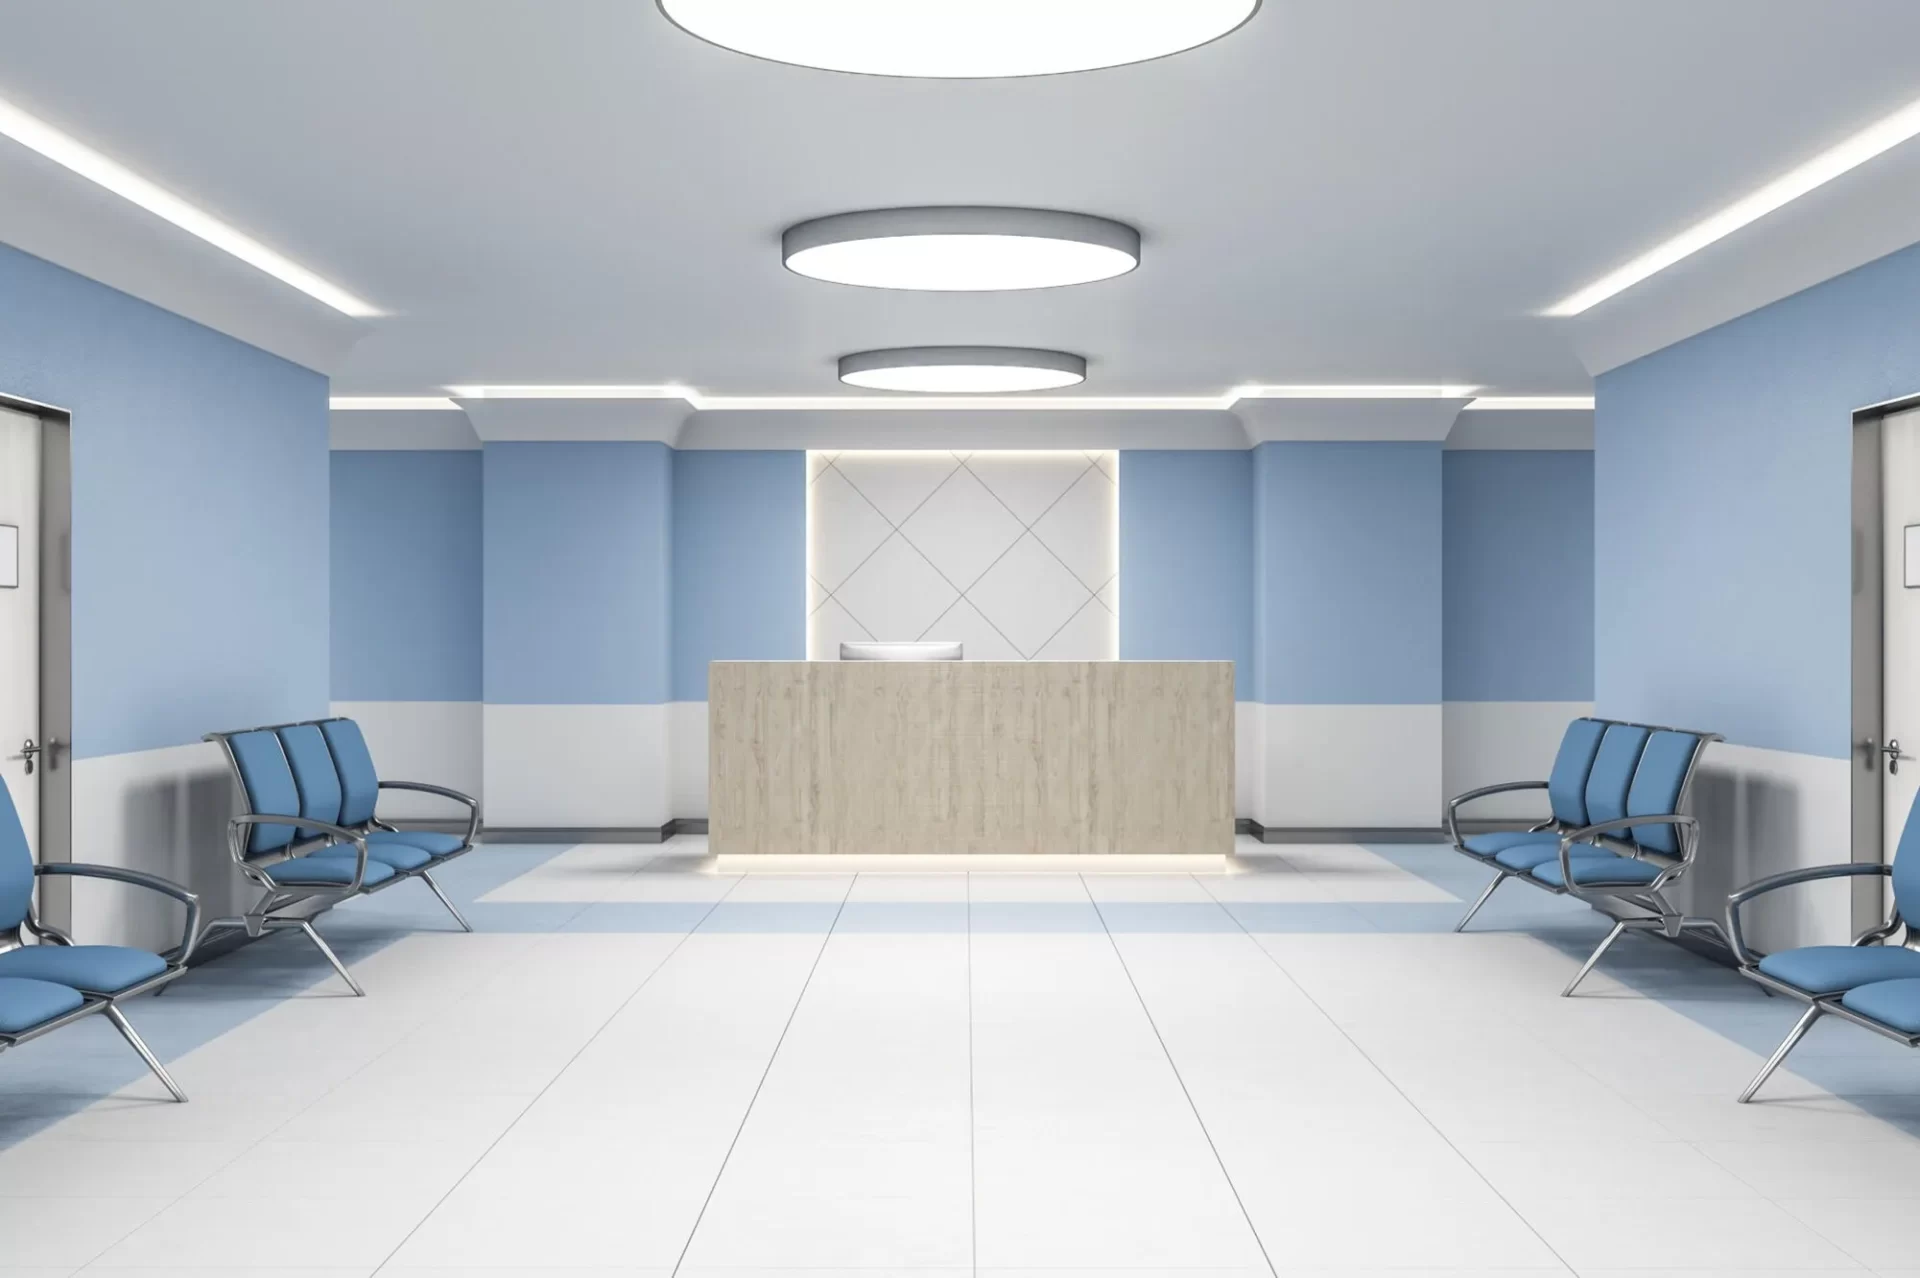 Why a Well-Designed Floor Plan is Essential for a Small Hospital